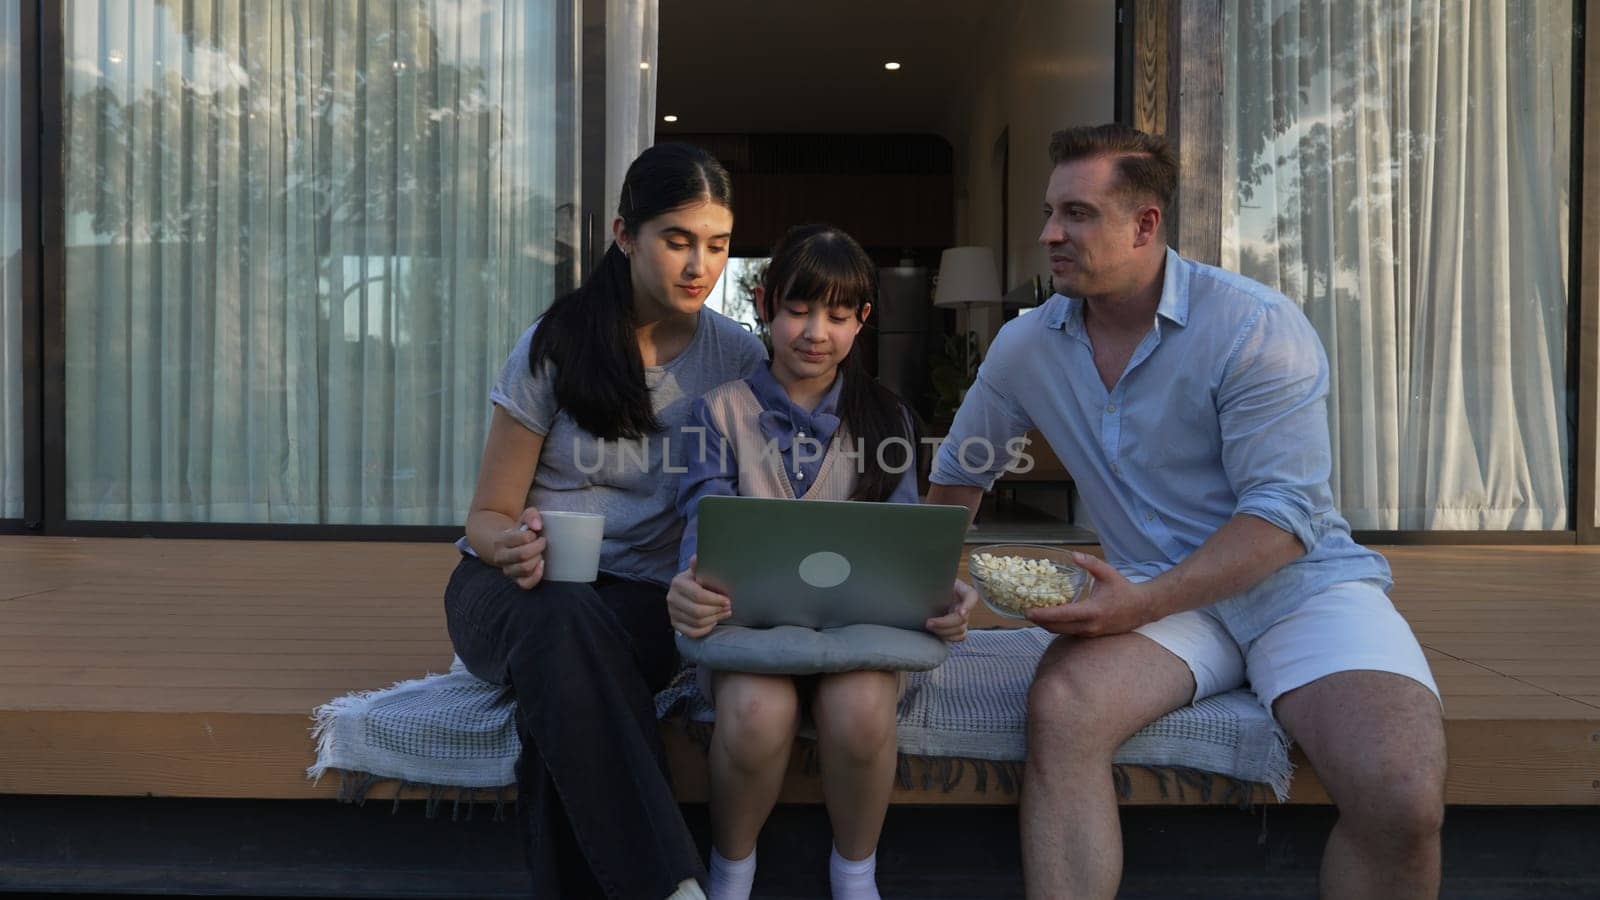 Father, mother and daughter focus laptop at terrace with garden view outside house. Parent use outdoor activity to communicate young generation about environment care cross generation gap. Divergence.